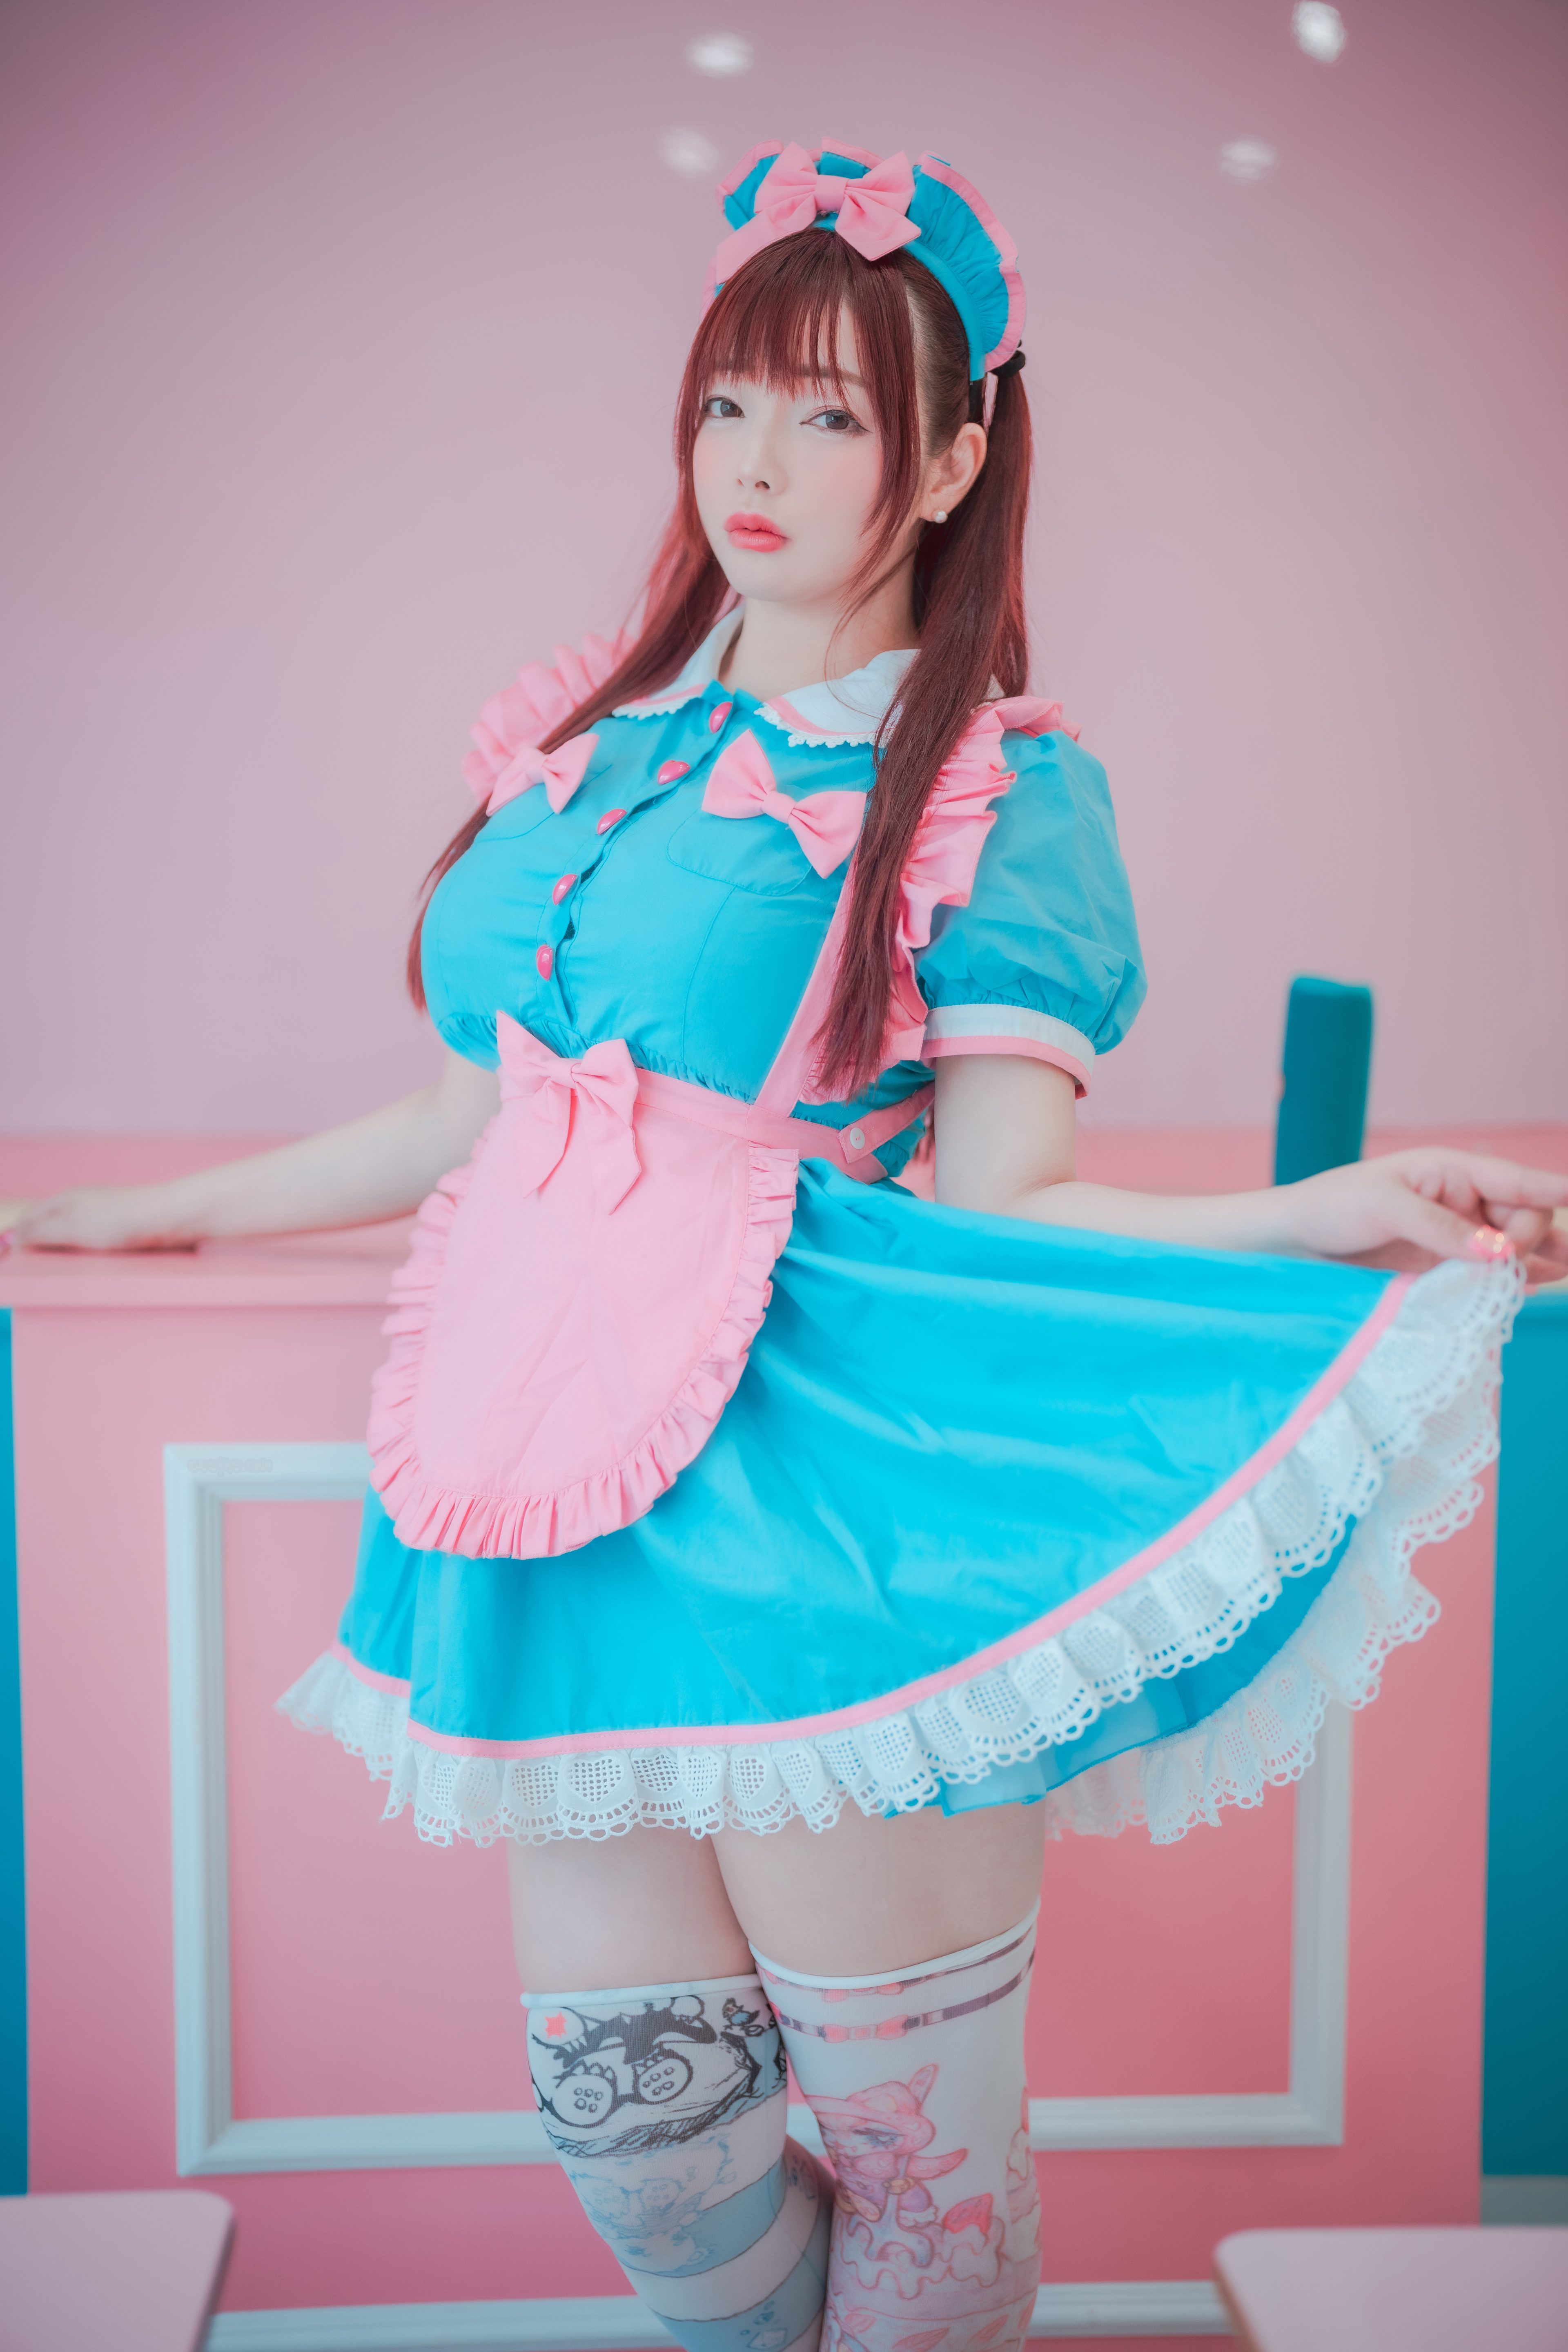 Women Model Asian Cosplay Maid Maid Outfit Women Indoors 3840x5760